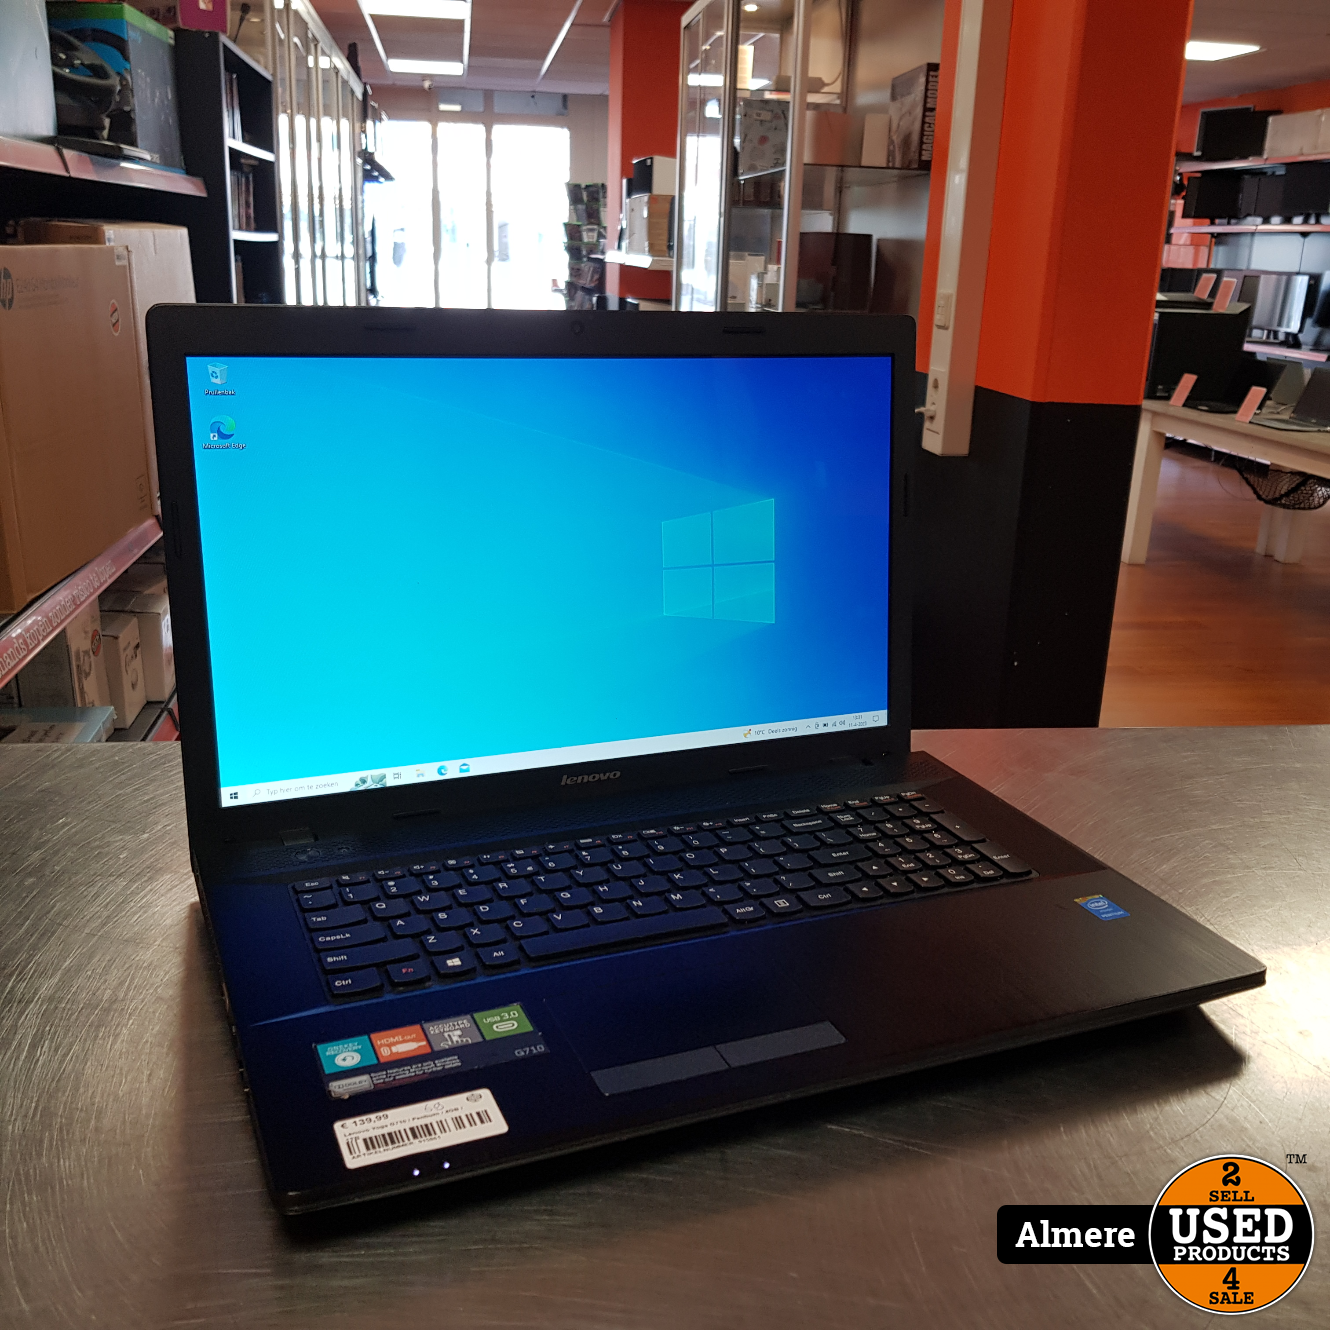 Lenovo Yoga G710 - Used Products Almere